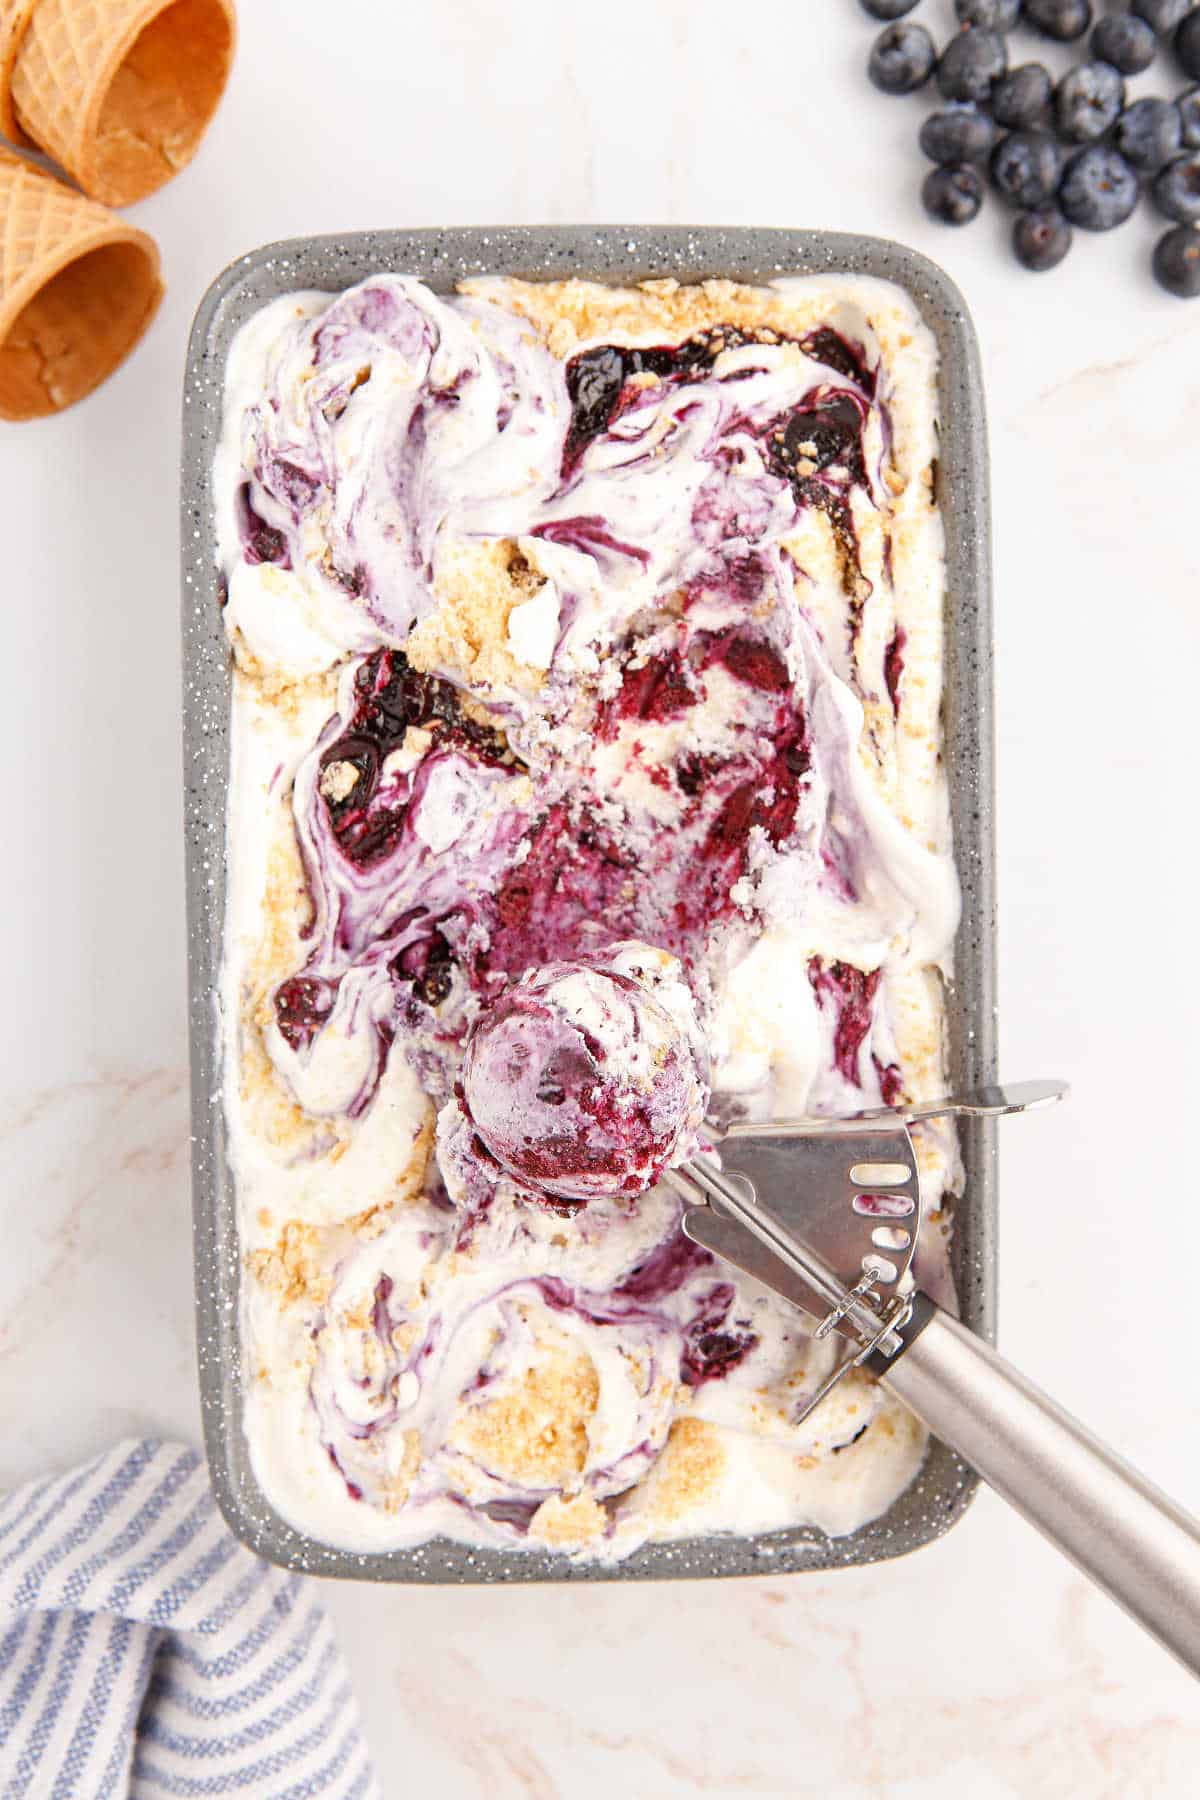 Blueberry pie ice cream in a loaf pan with an ice cream scoop.